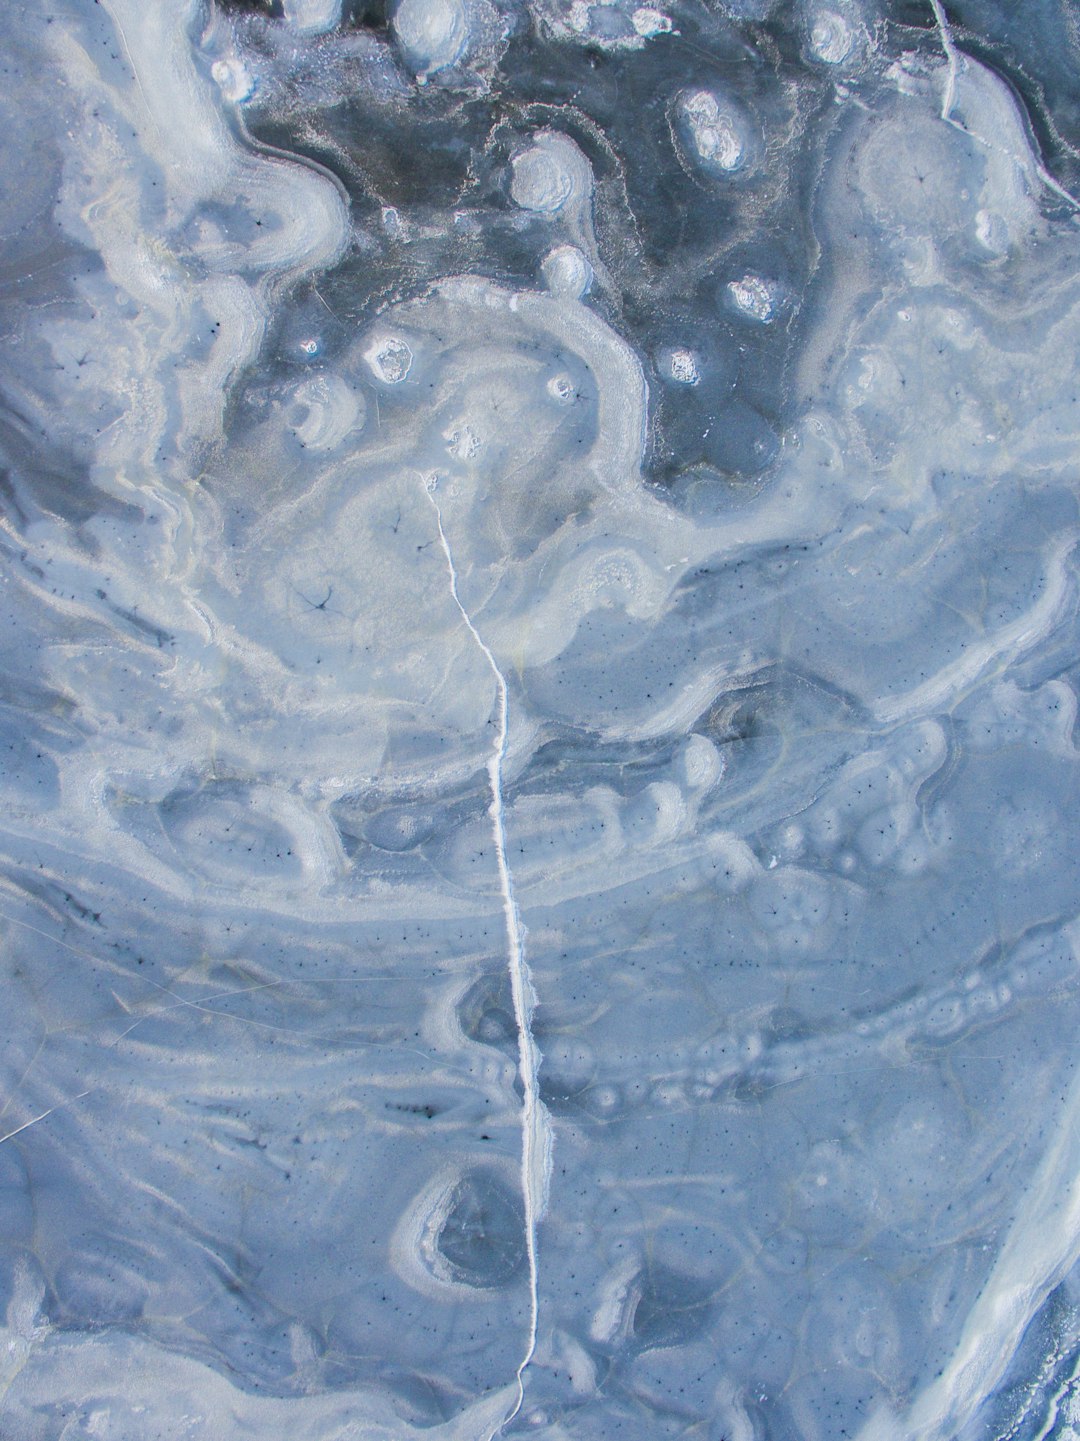 an abstract painting of swirling ice, blue and grey colors, a small white crack in the center is filled with water drops, close up, macro photography, –ar 95:128